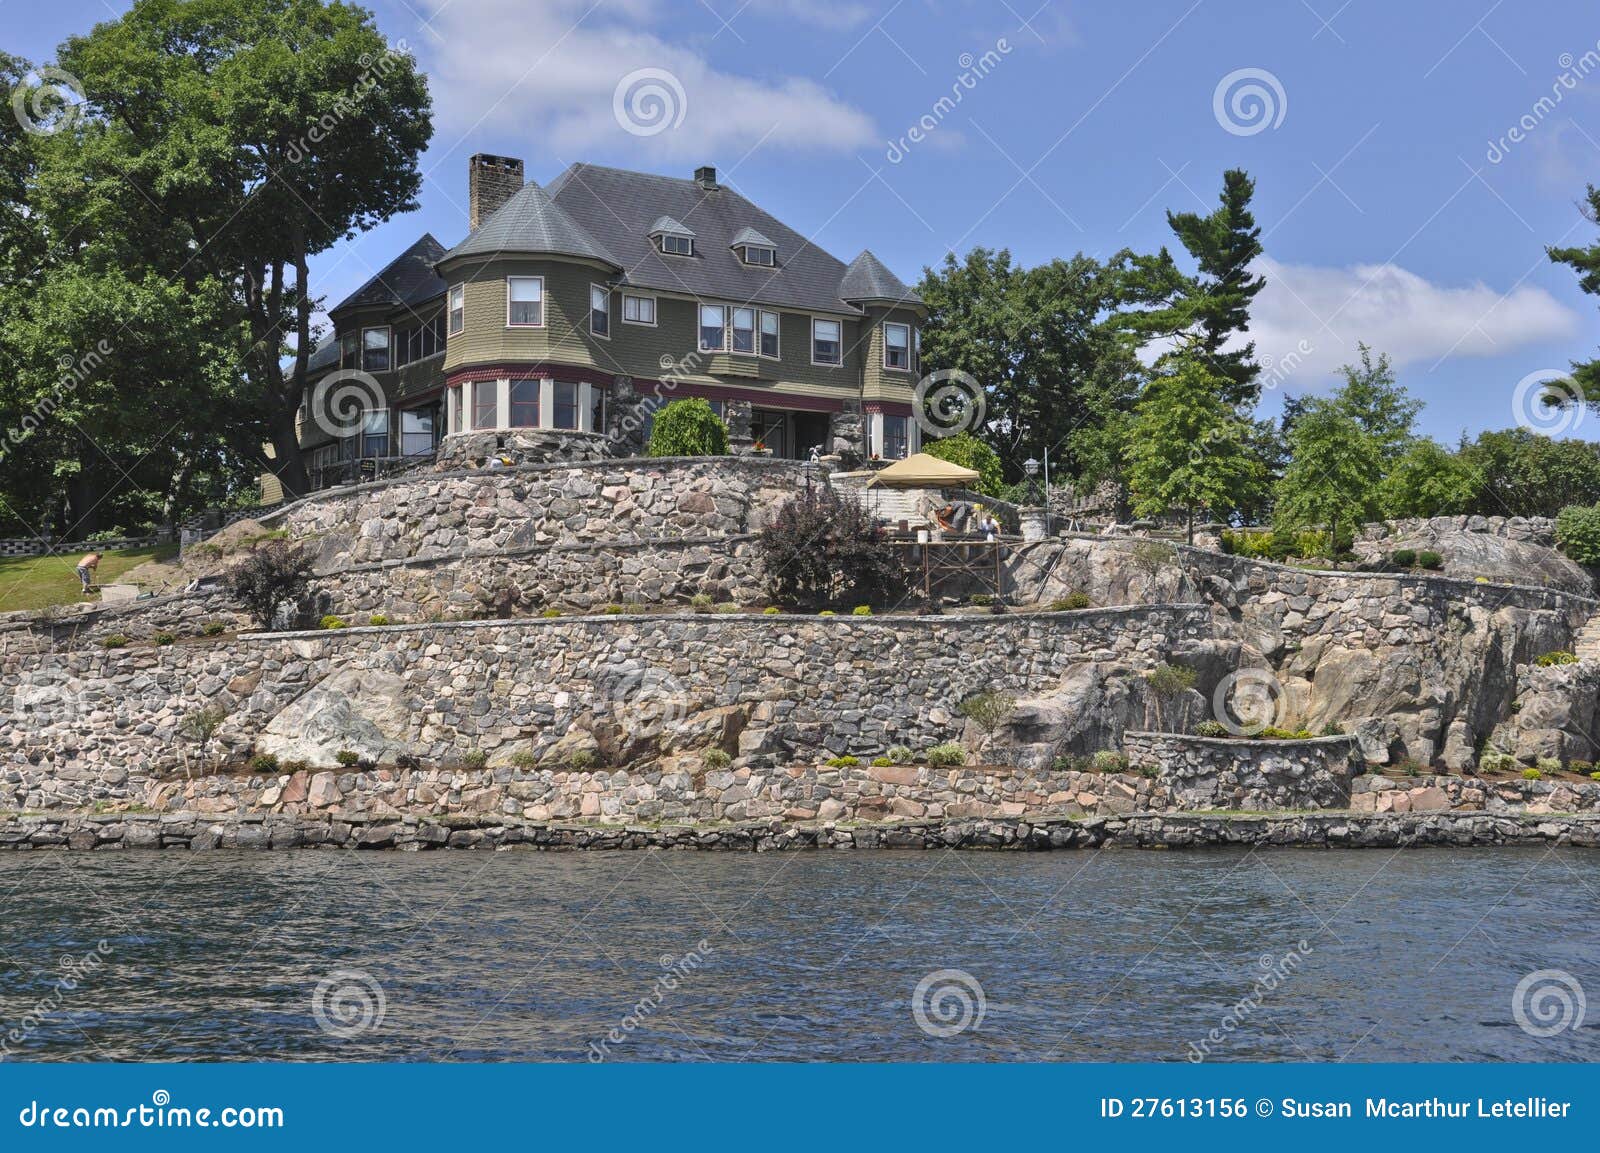 home or cottage in thousand islands